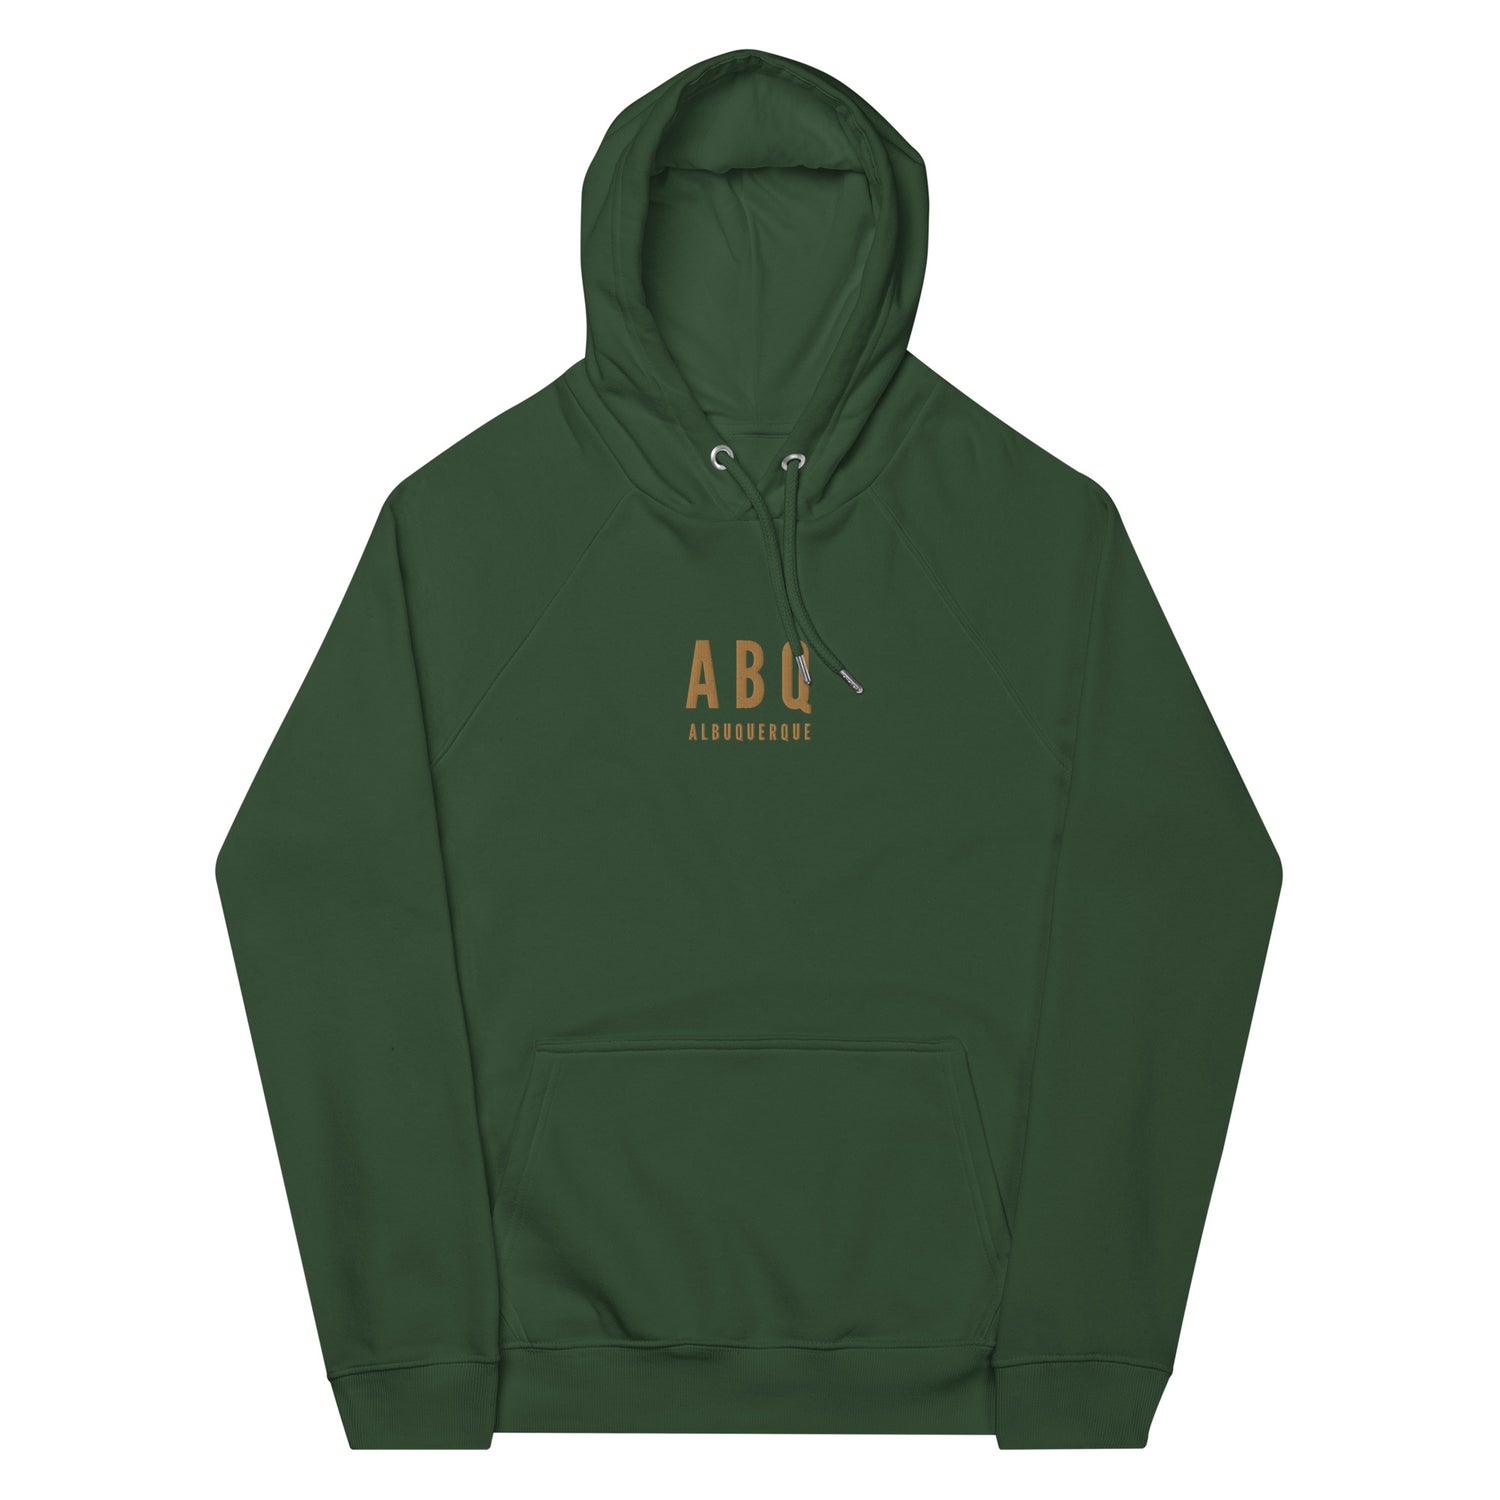 Albuquerque New Mexico Hoodies and Sweatshirts • ABQ Airport Code